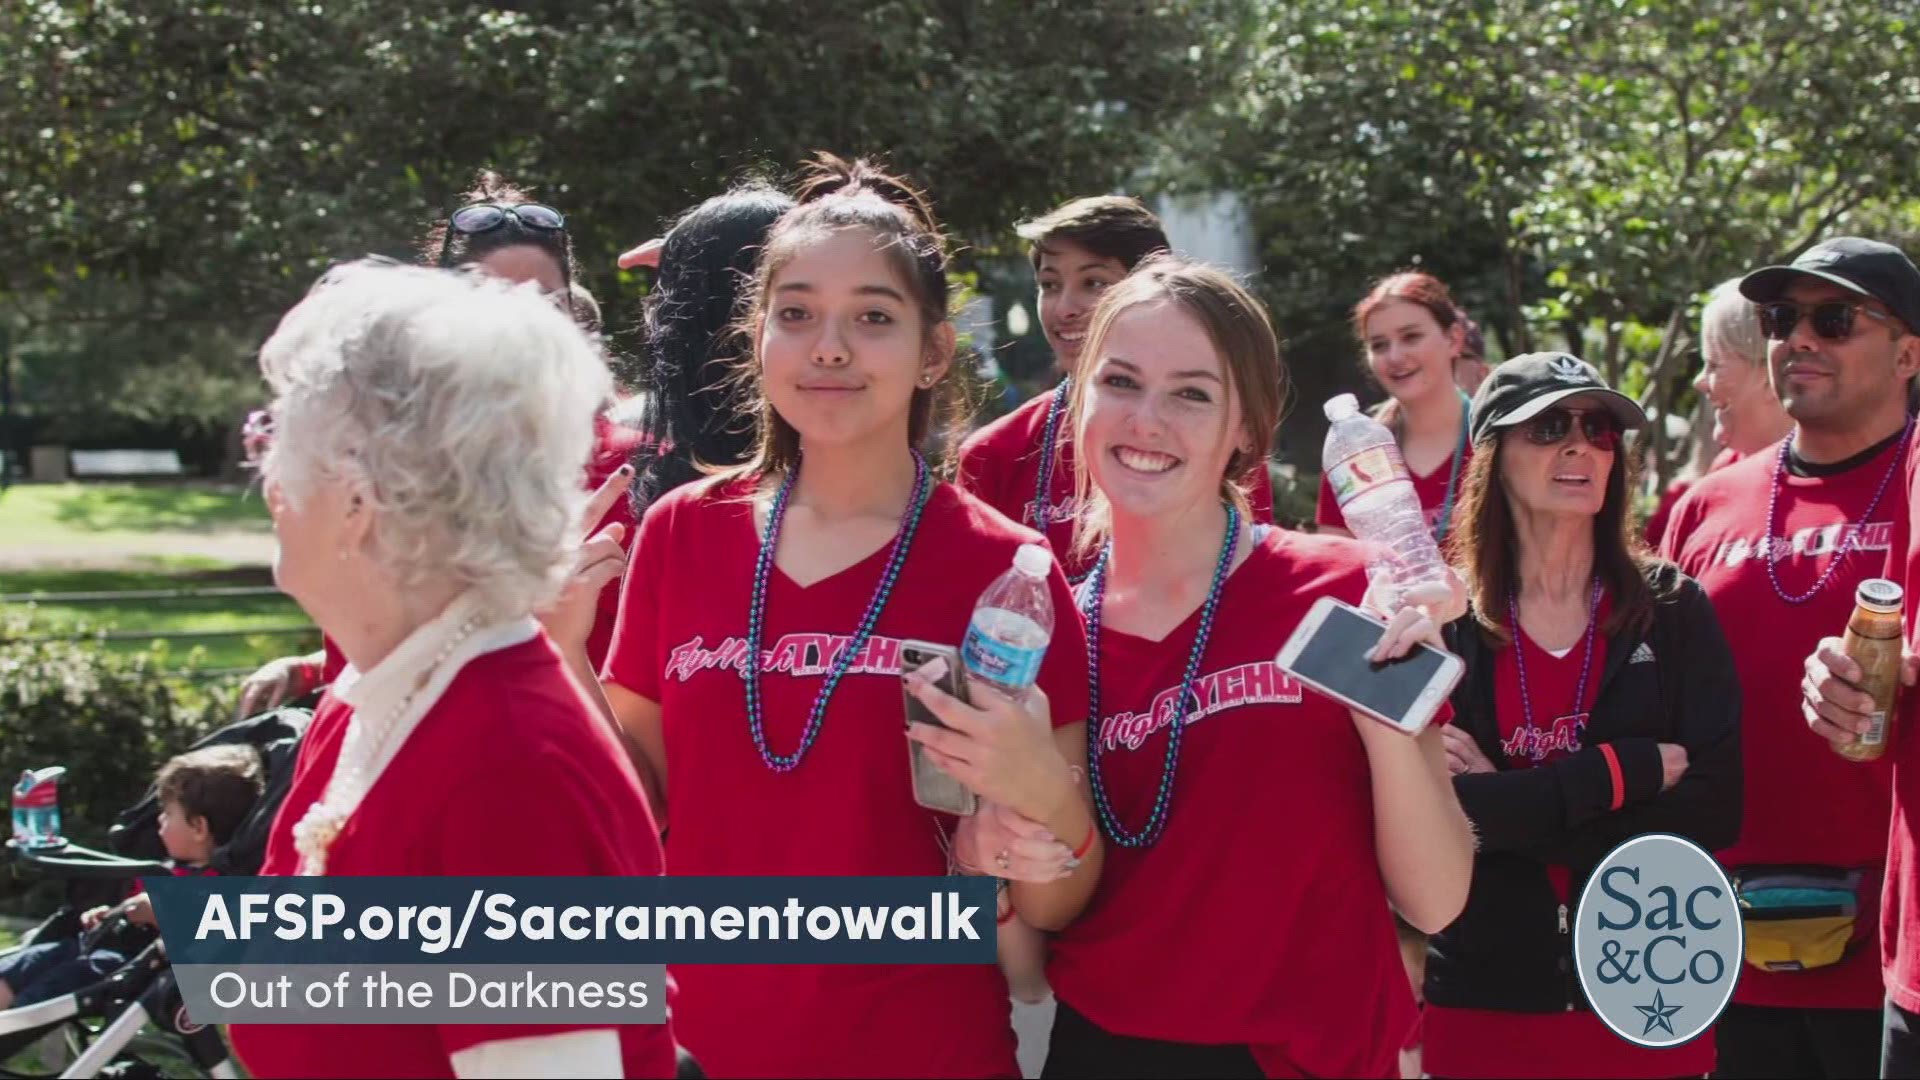 Save lives and bring hope to those affected by suicide. Learn more about the Sacramento Out of Darkness Community Walk and how they continue to grow yearly both in funds raised and in participants.